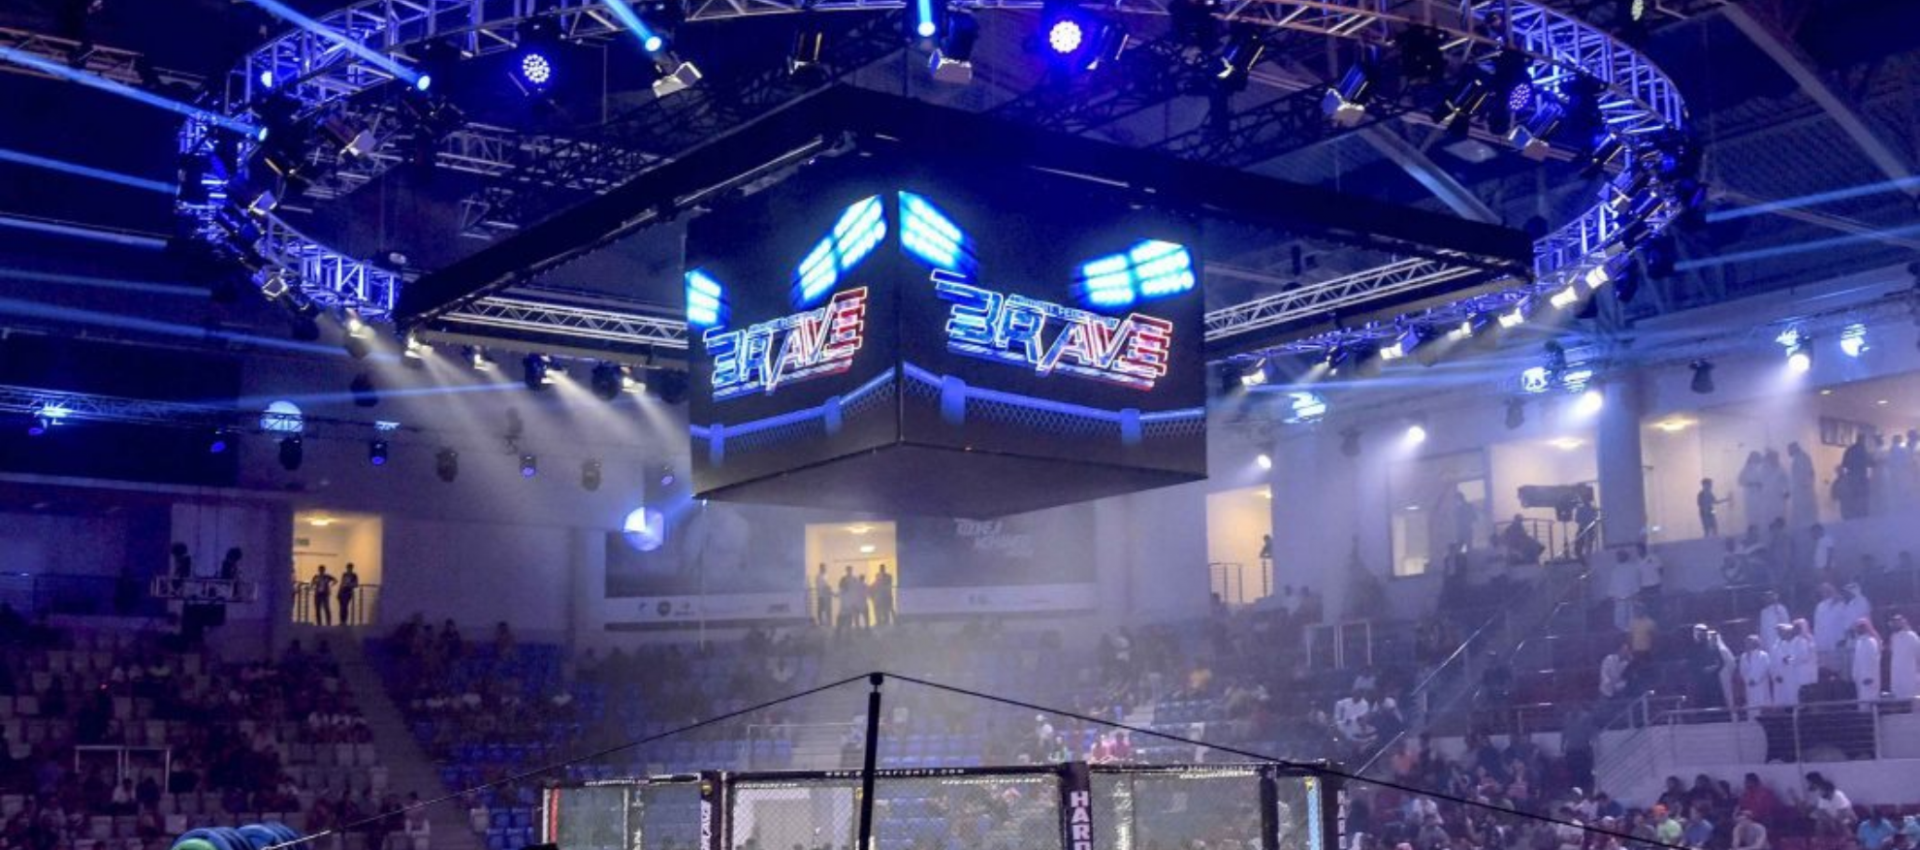 Event Organizing for Brave MMA